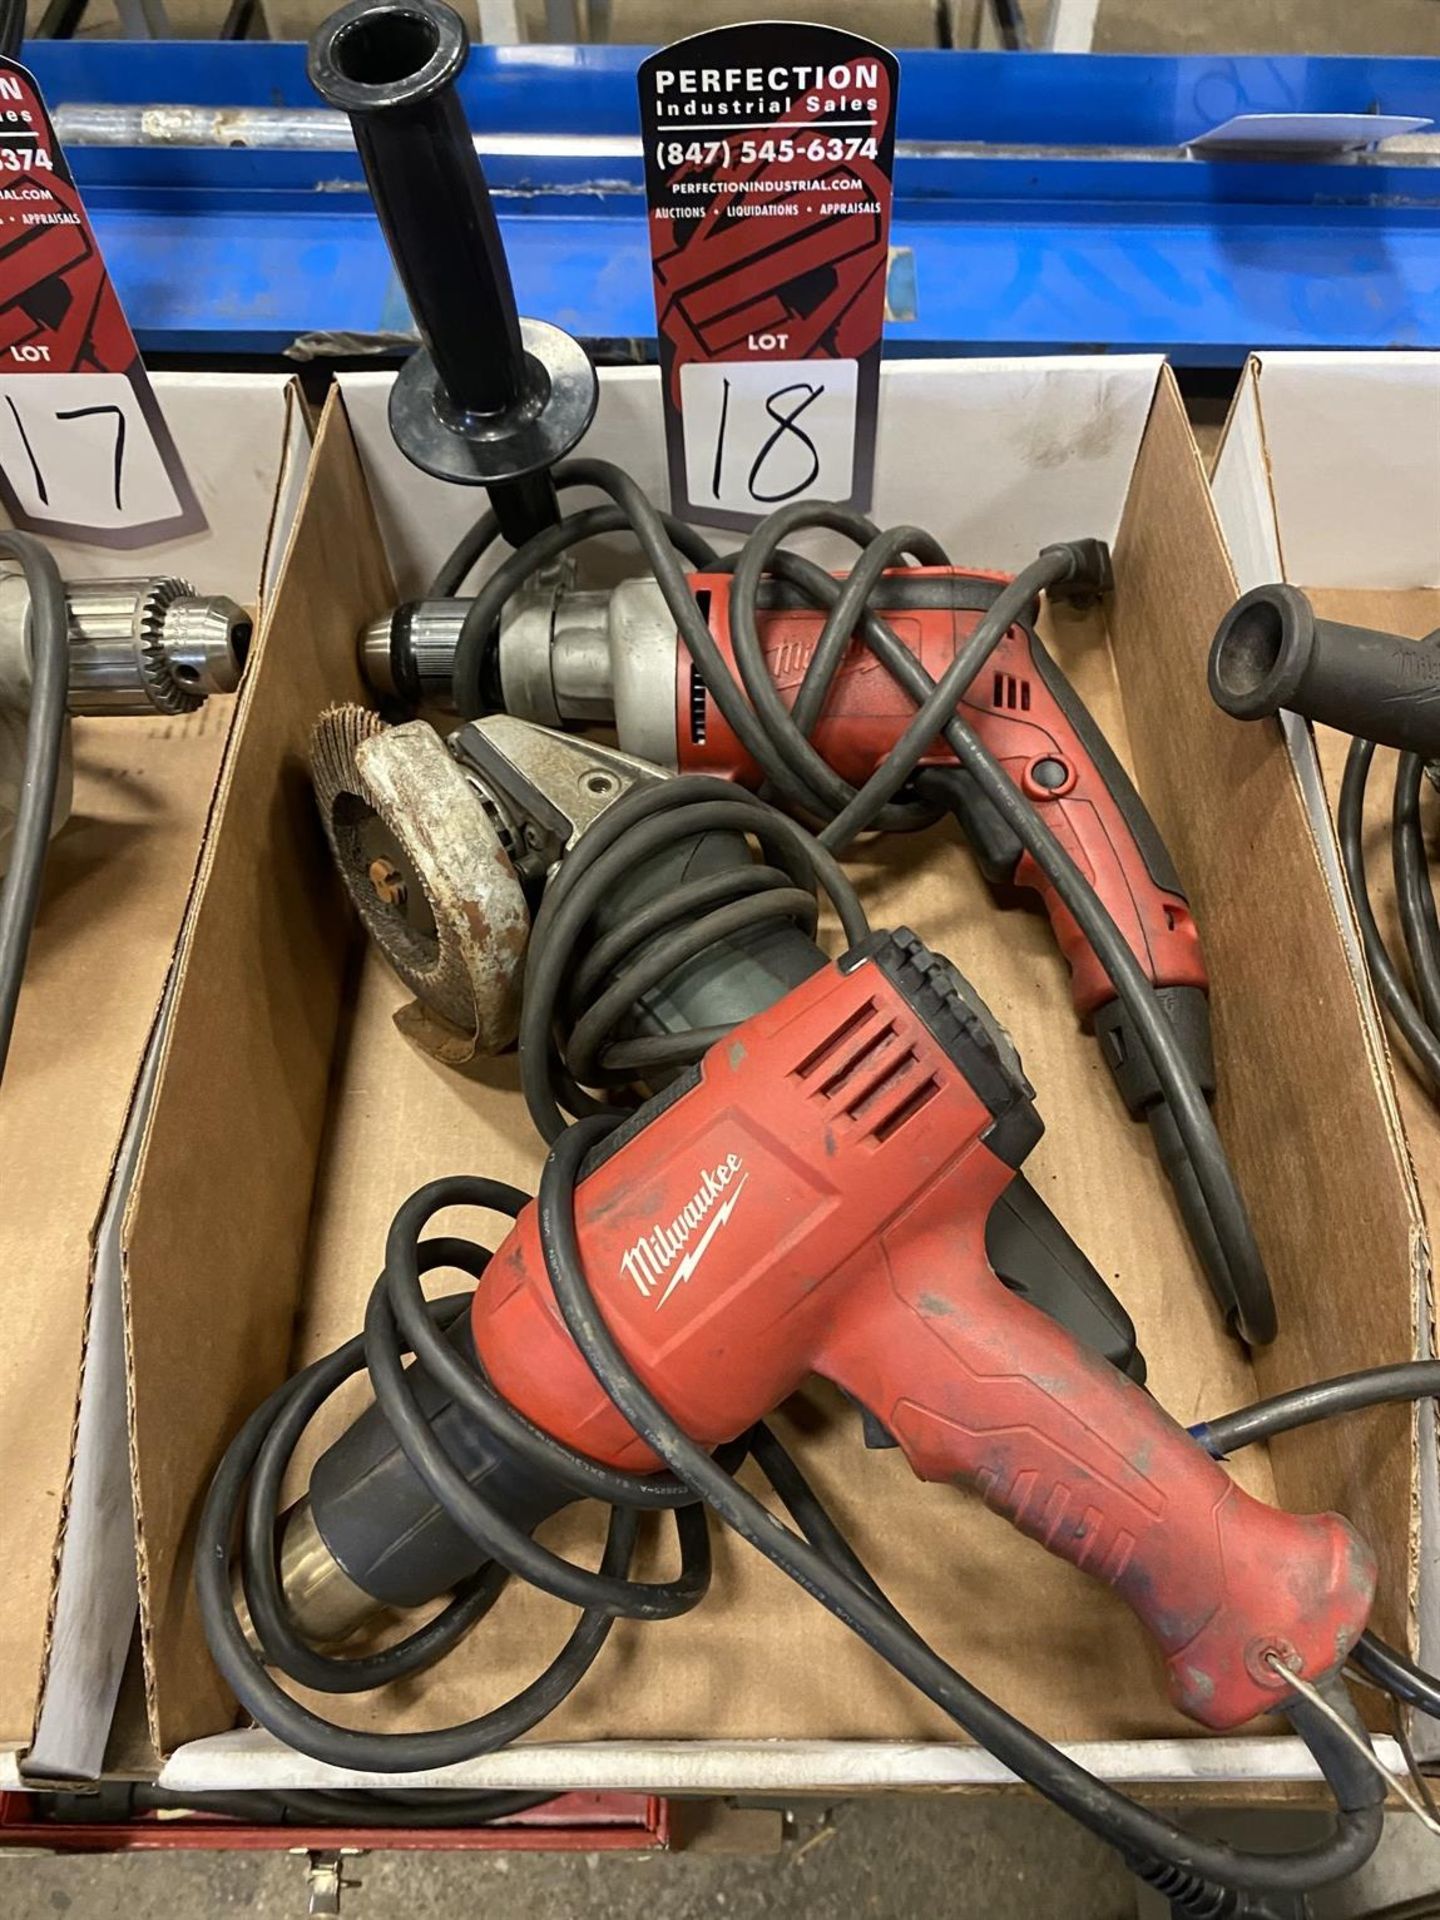 Lot Comprising MILWAUKEE 1/2" Drill, Heat Gun and METABO 4" Angle Grinder